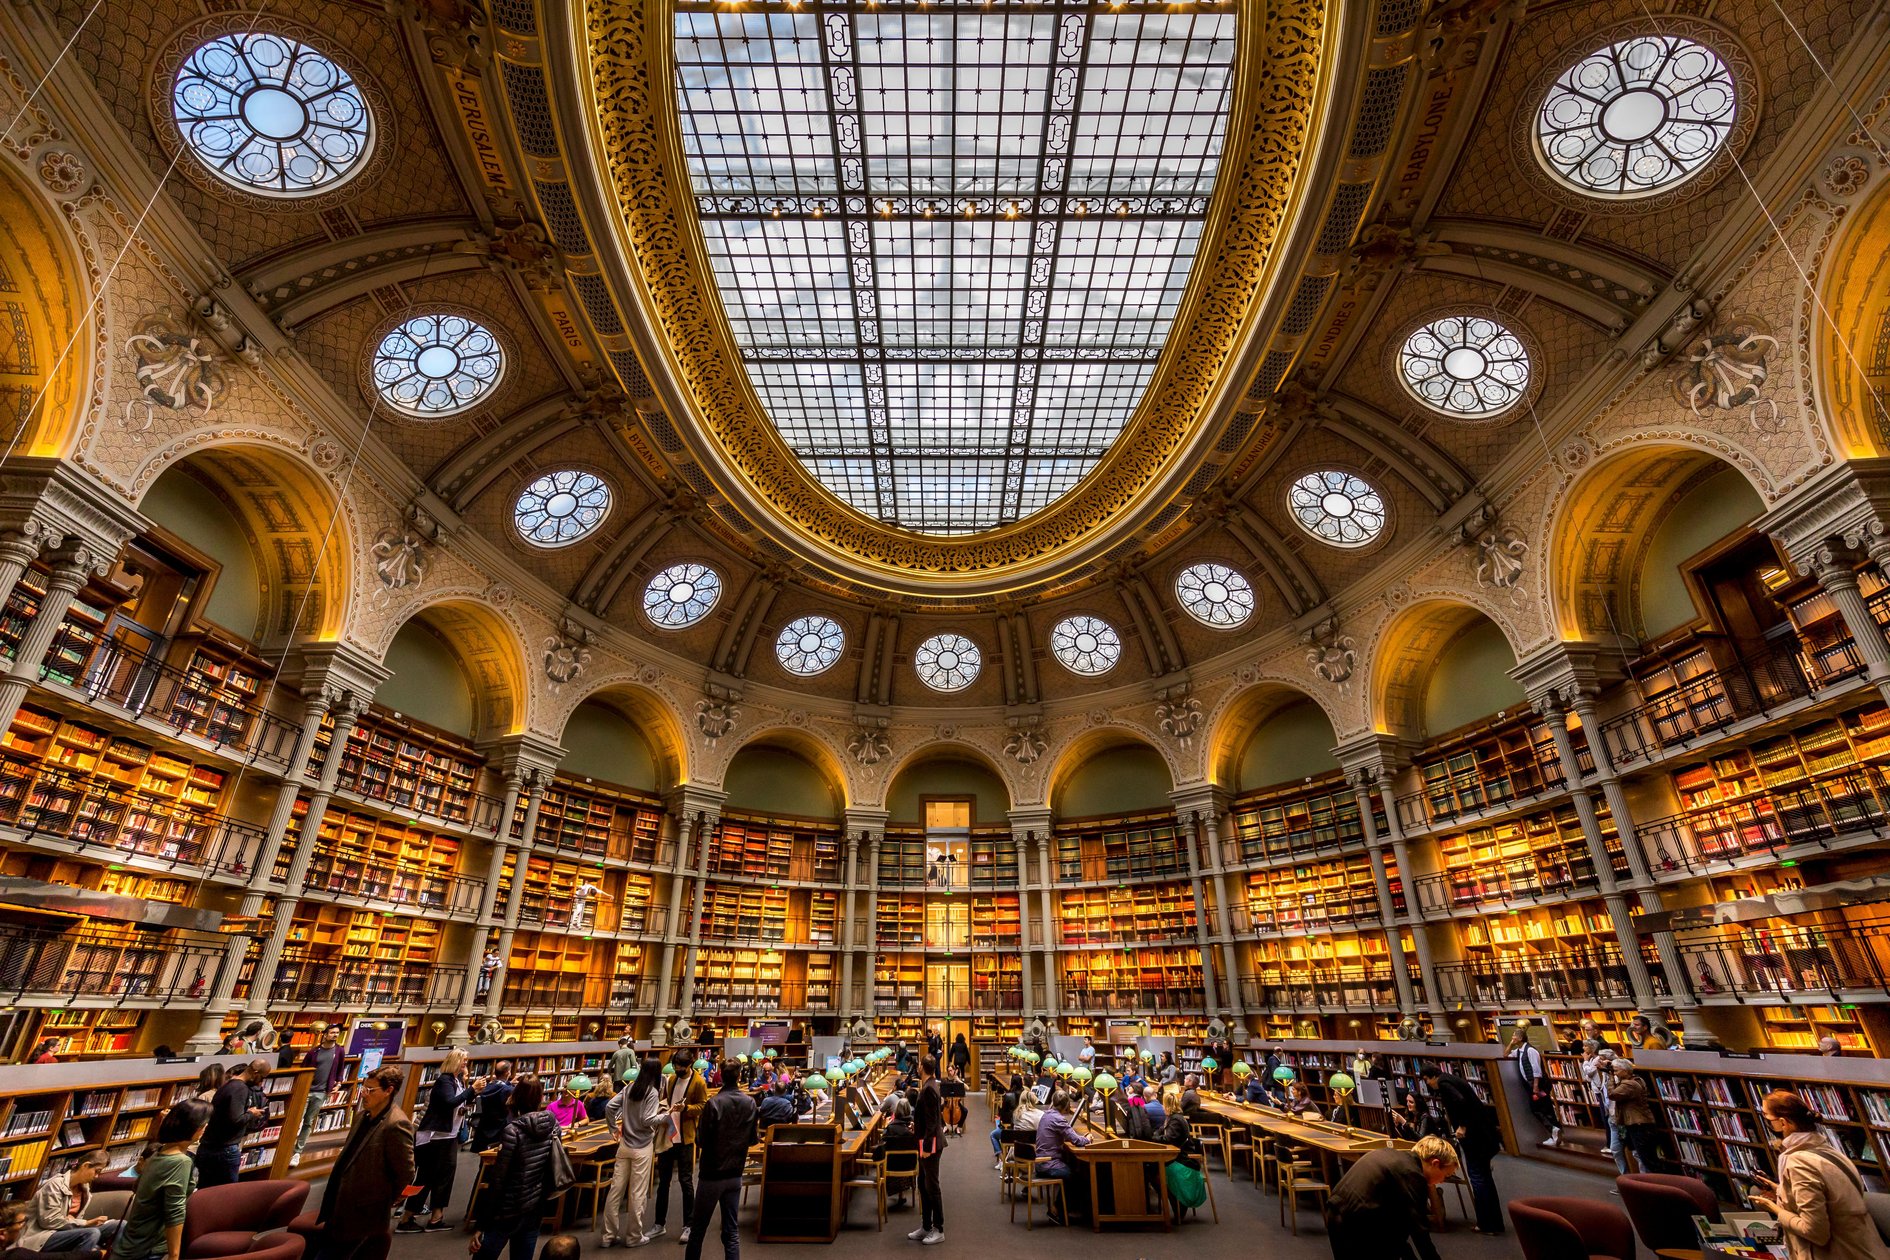 Bibliotheque Nationale in Paris where Rajiv’s research papers have been collected and bound along with other works from the Louvre and the Sorbonne.